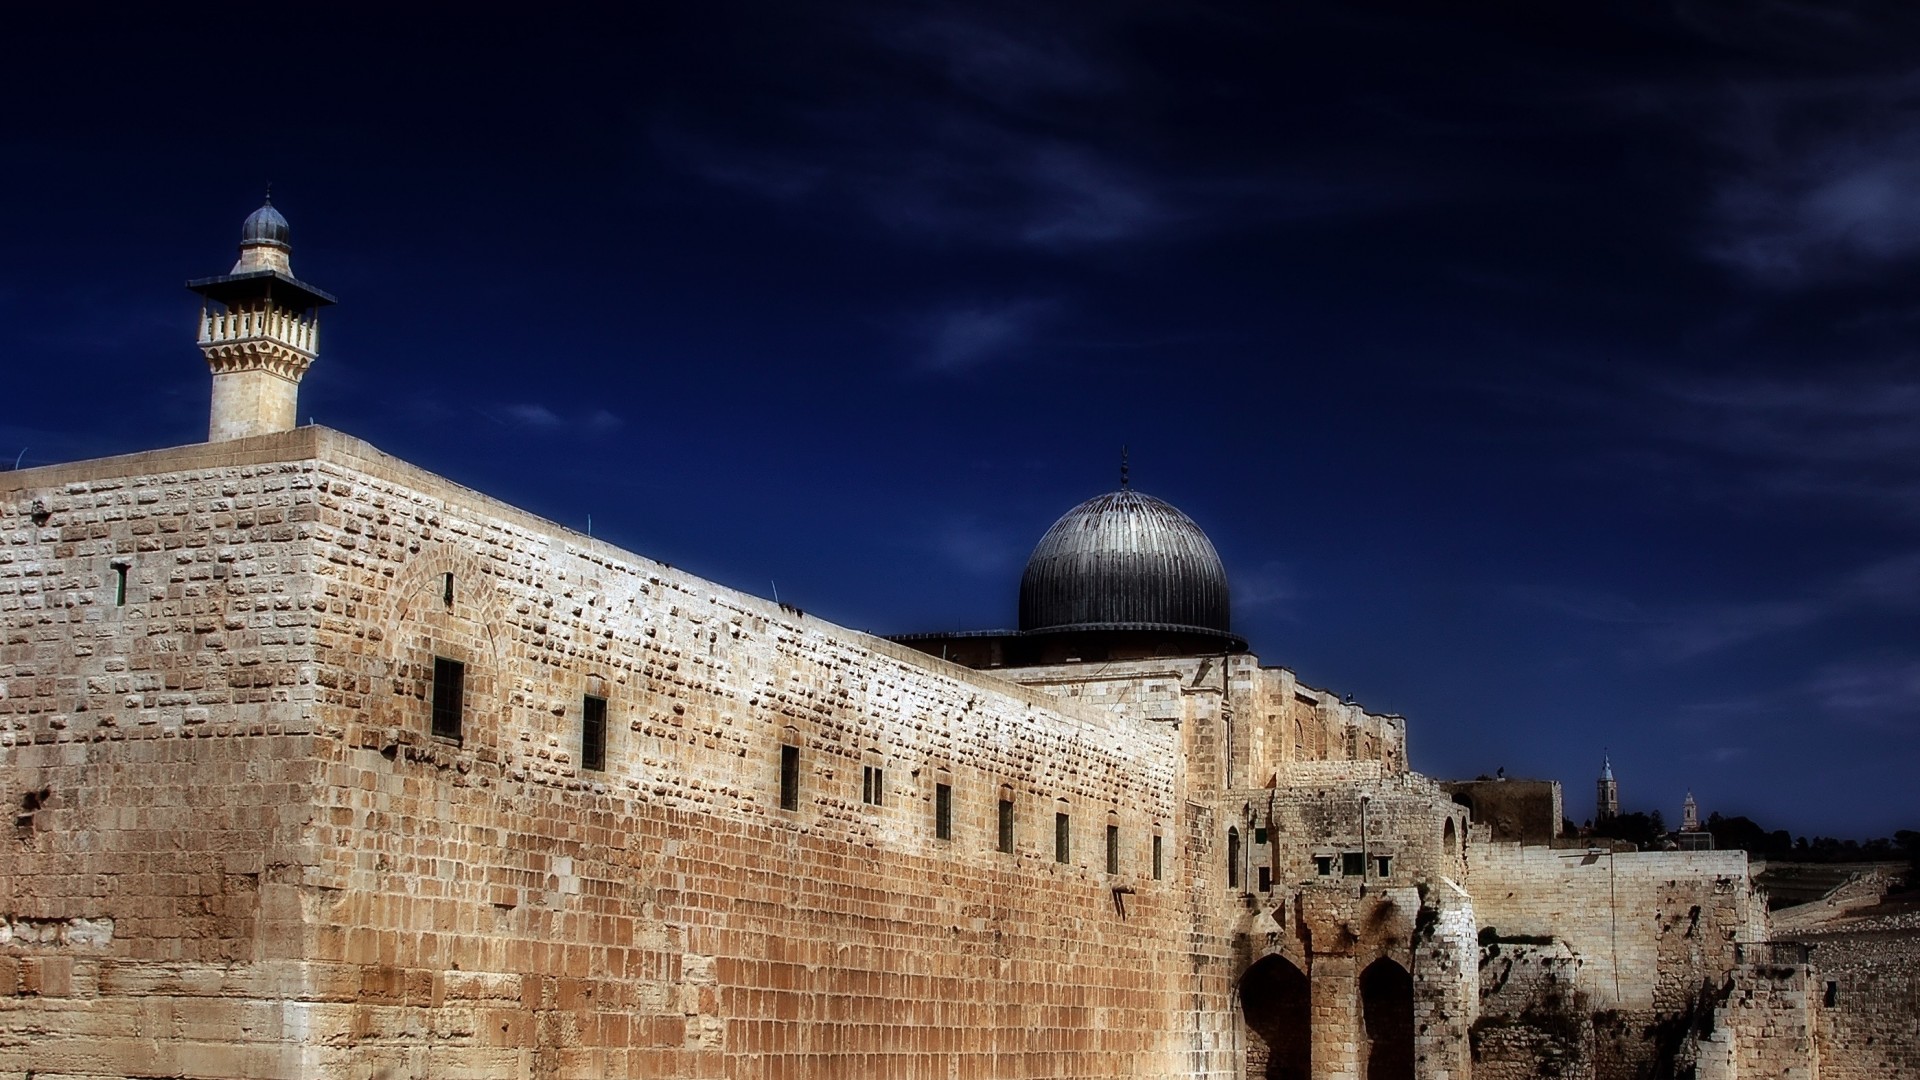 israel wallpaper hd,landmark,sky,holy places,architecture,building